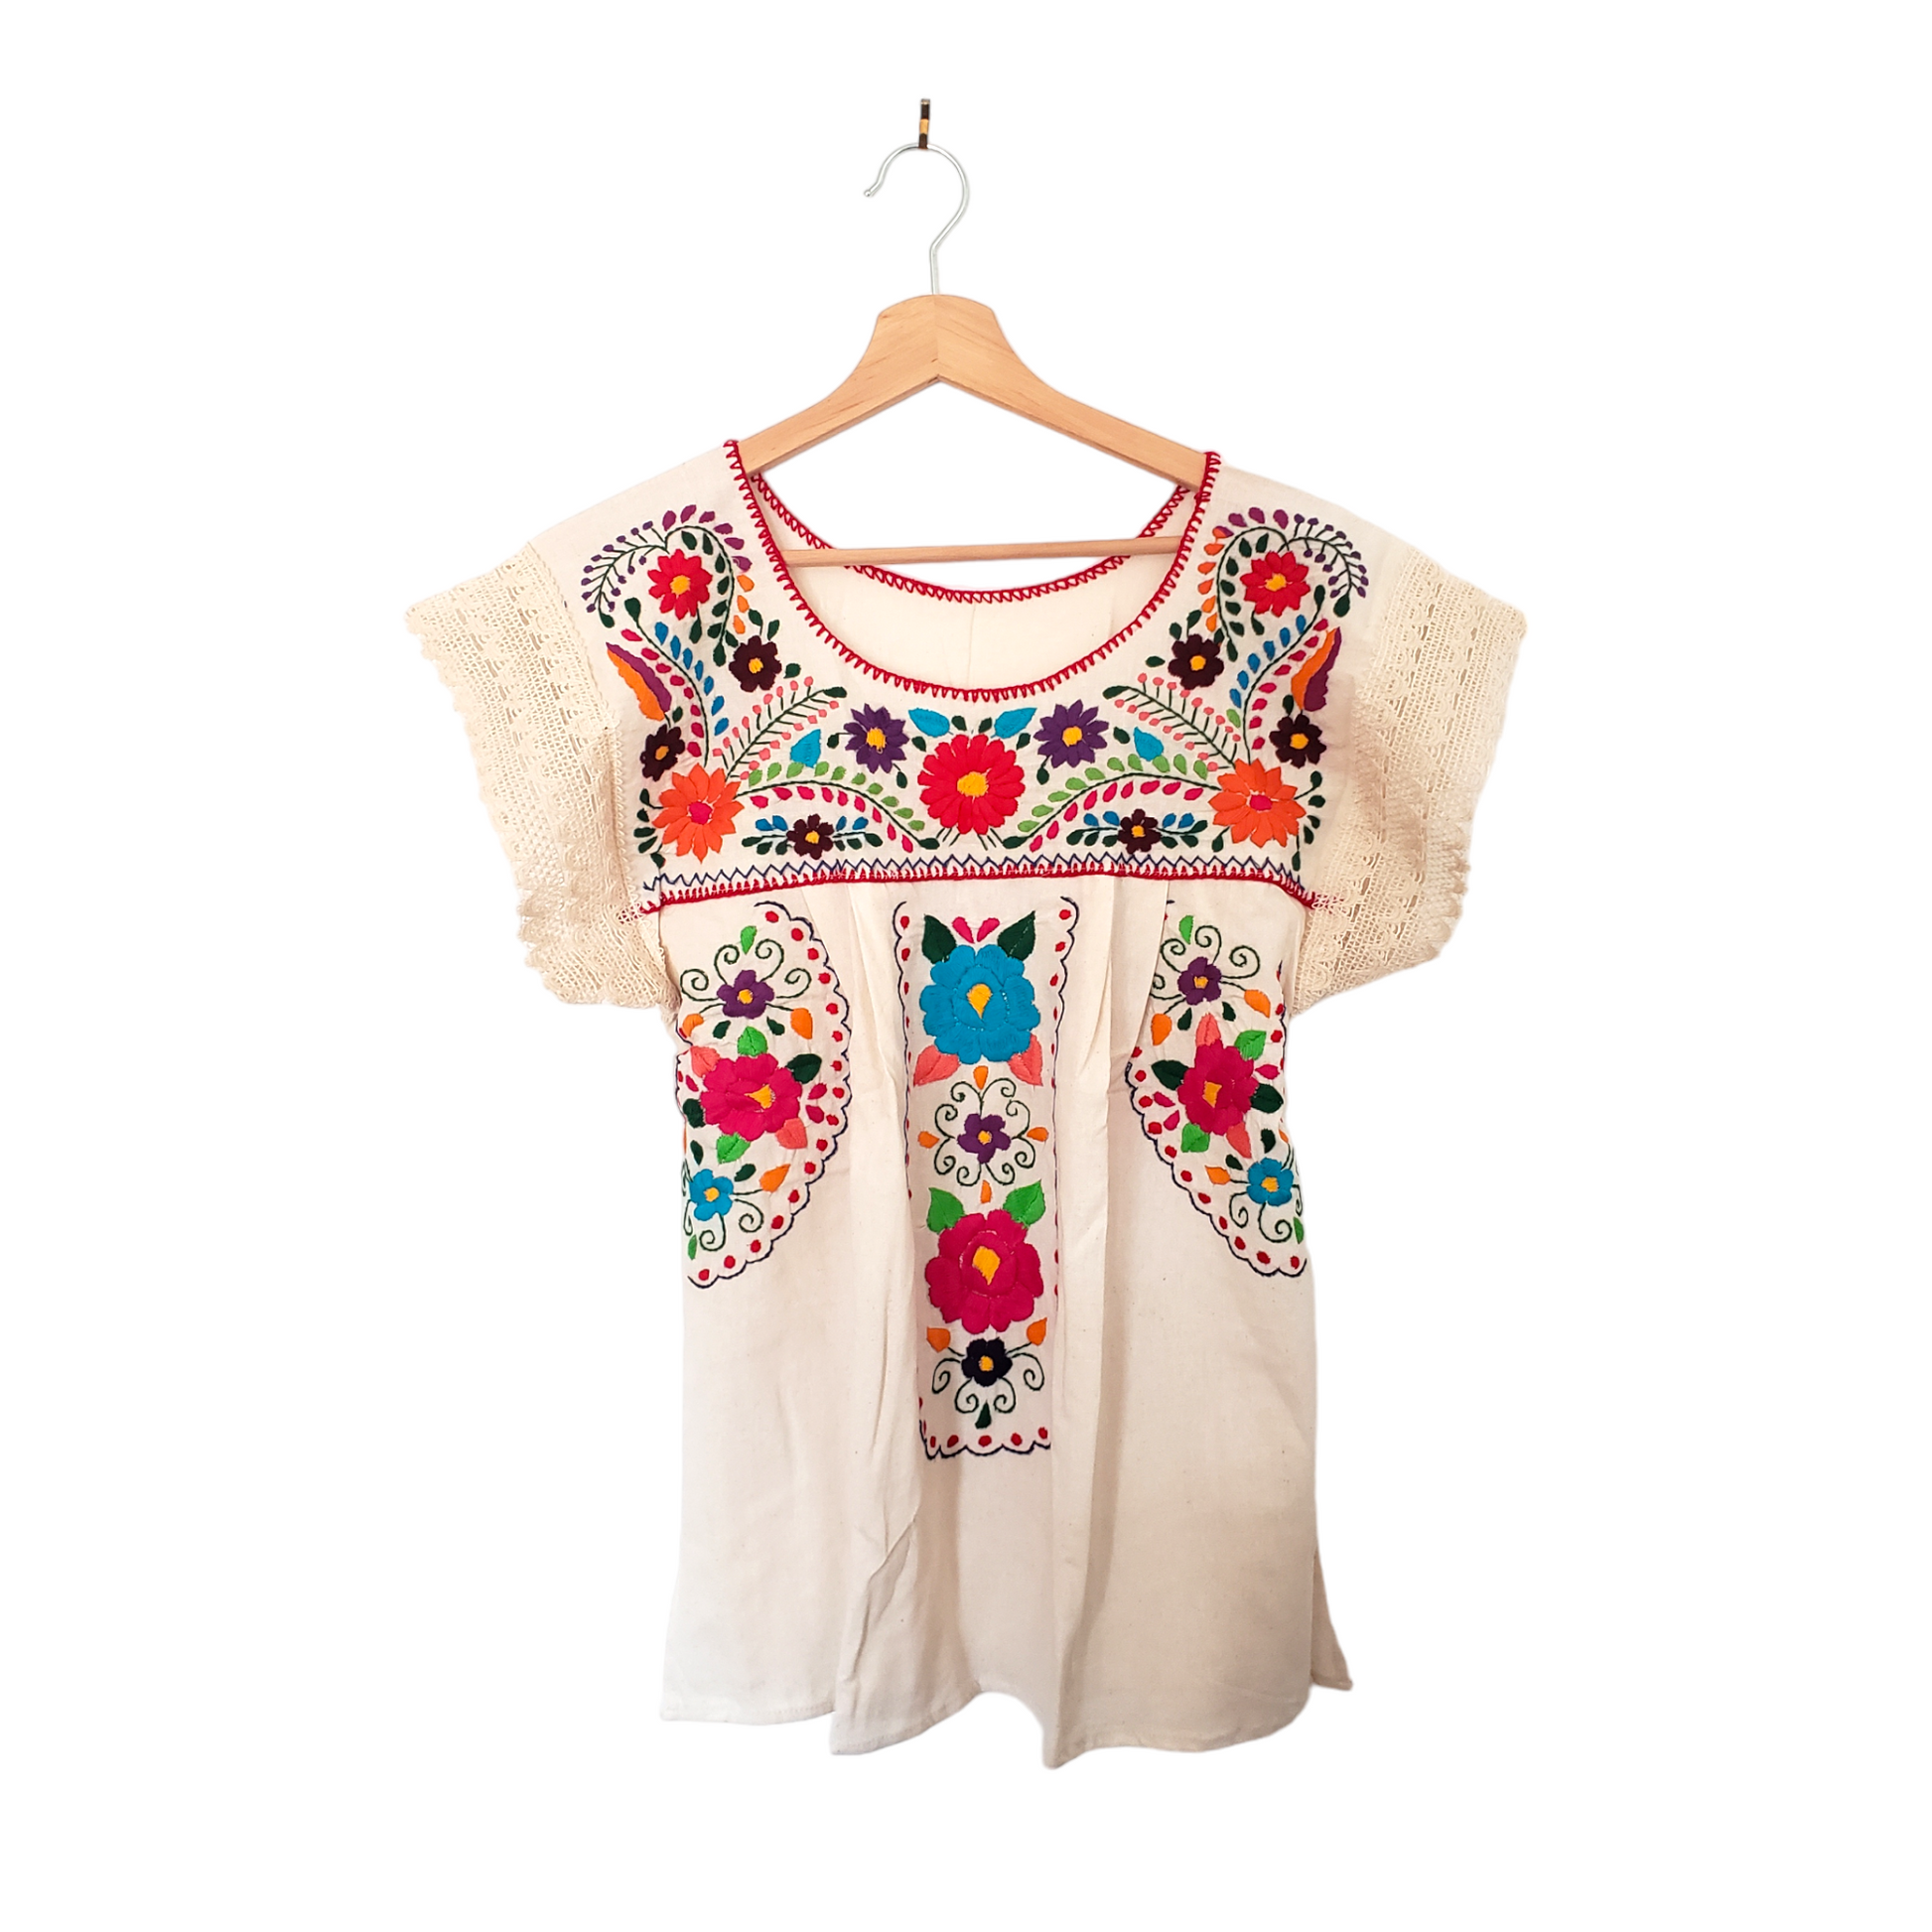 Boho Floral Embroidery Mexican Blouse Shirts - Full Circle Yoga School